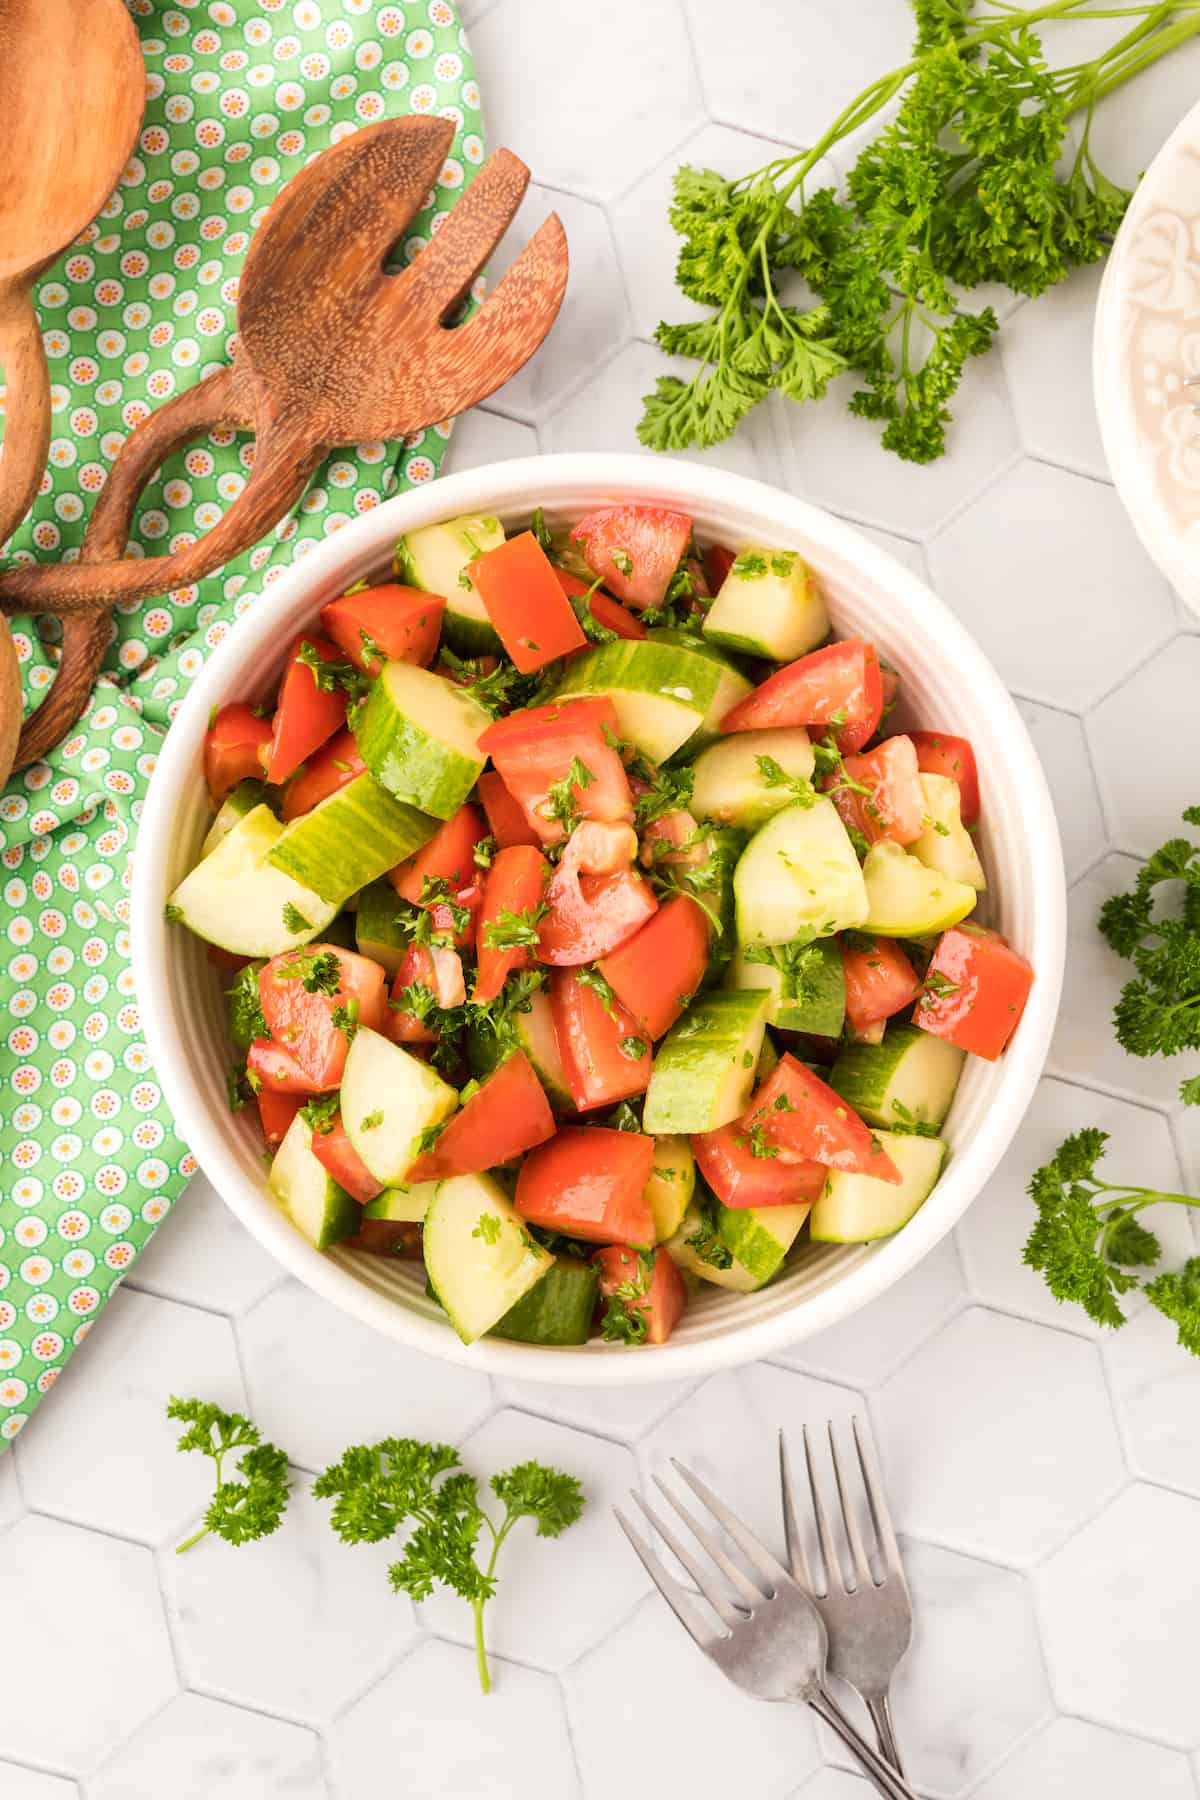 tomatoes, cucumber and parsley in a salad bowl